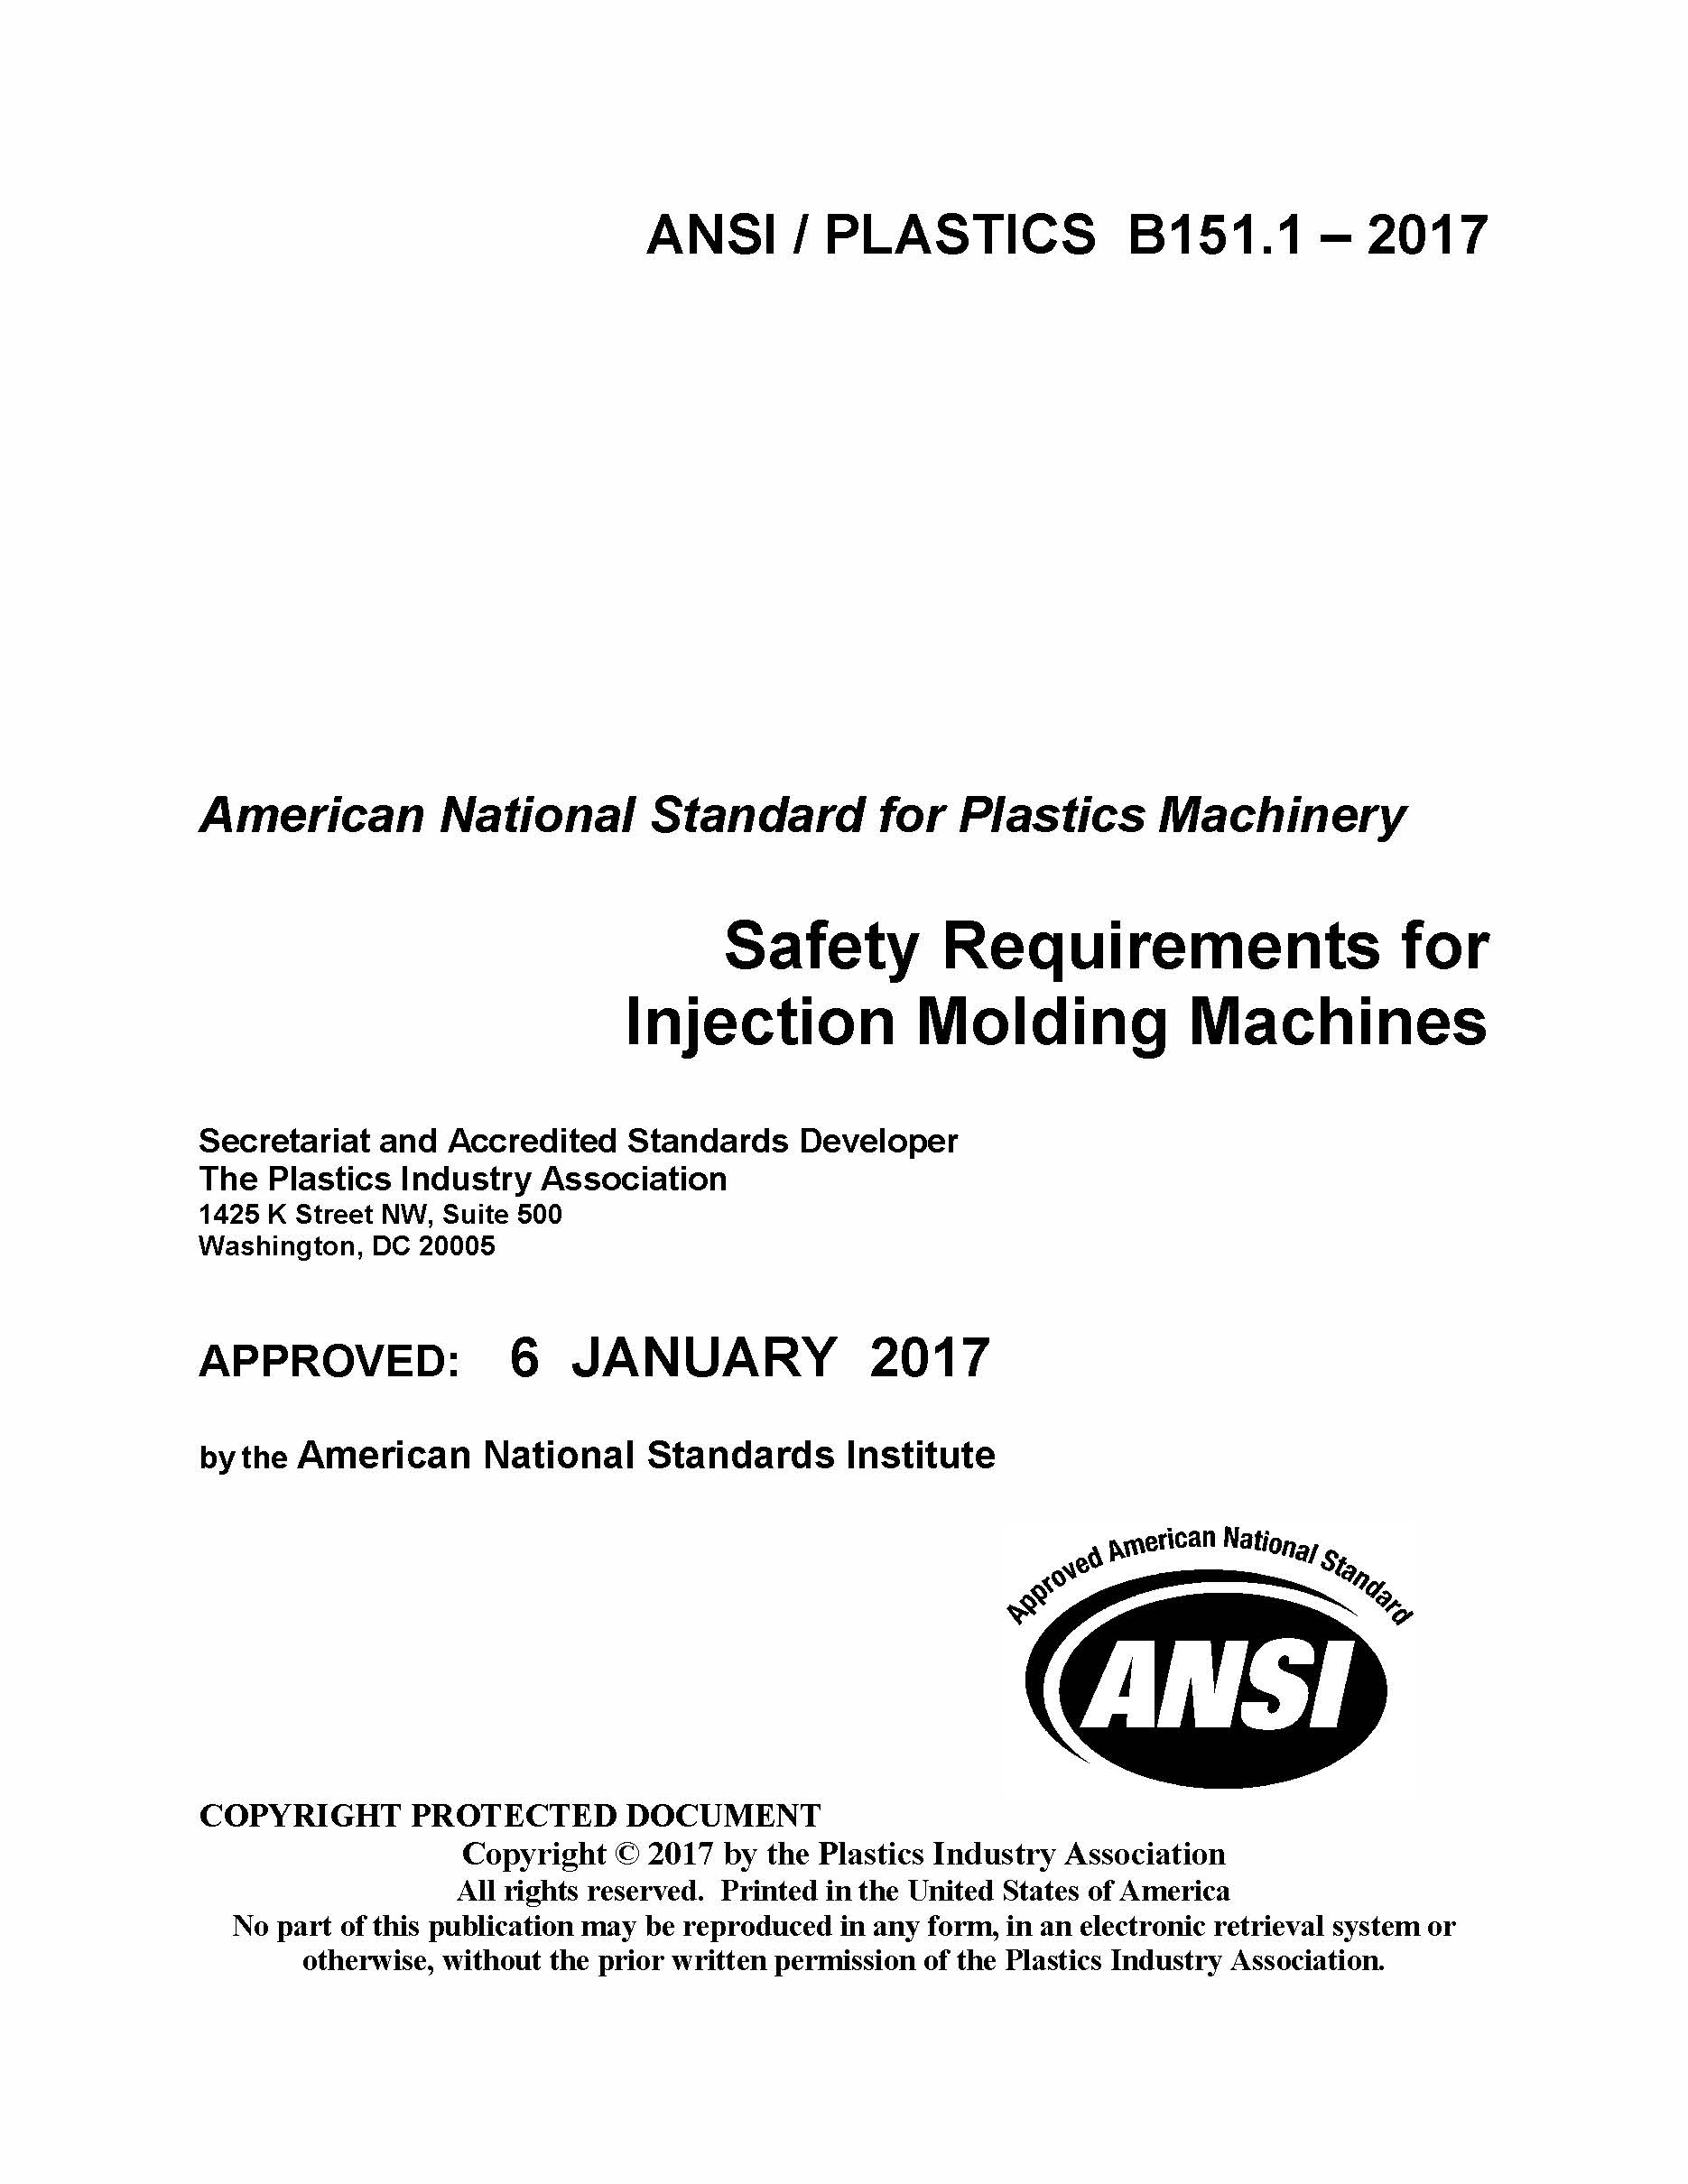 ANSI/PLASTICS B151.1-2017 Safety Requirements for IMM